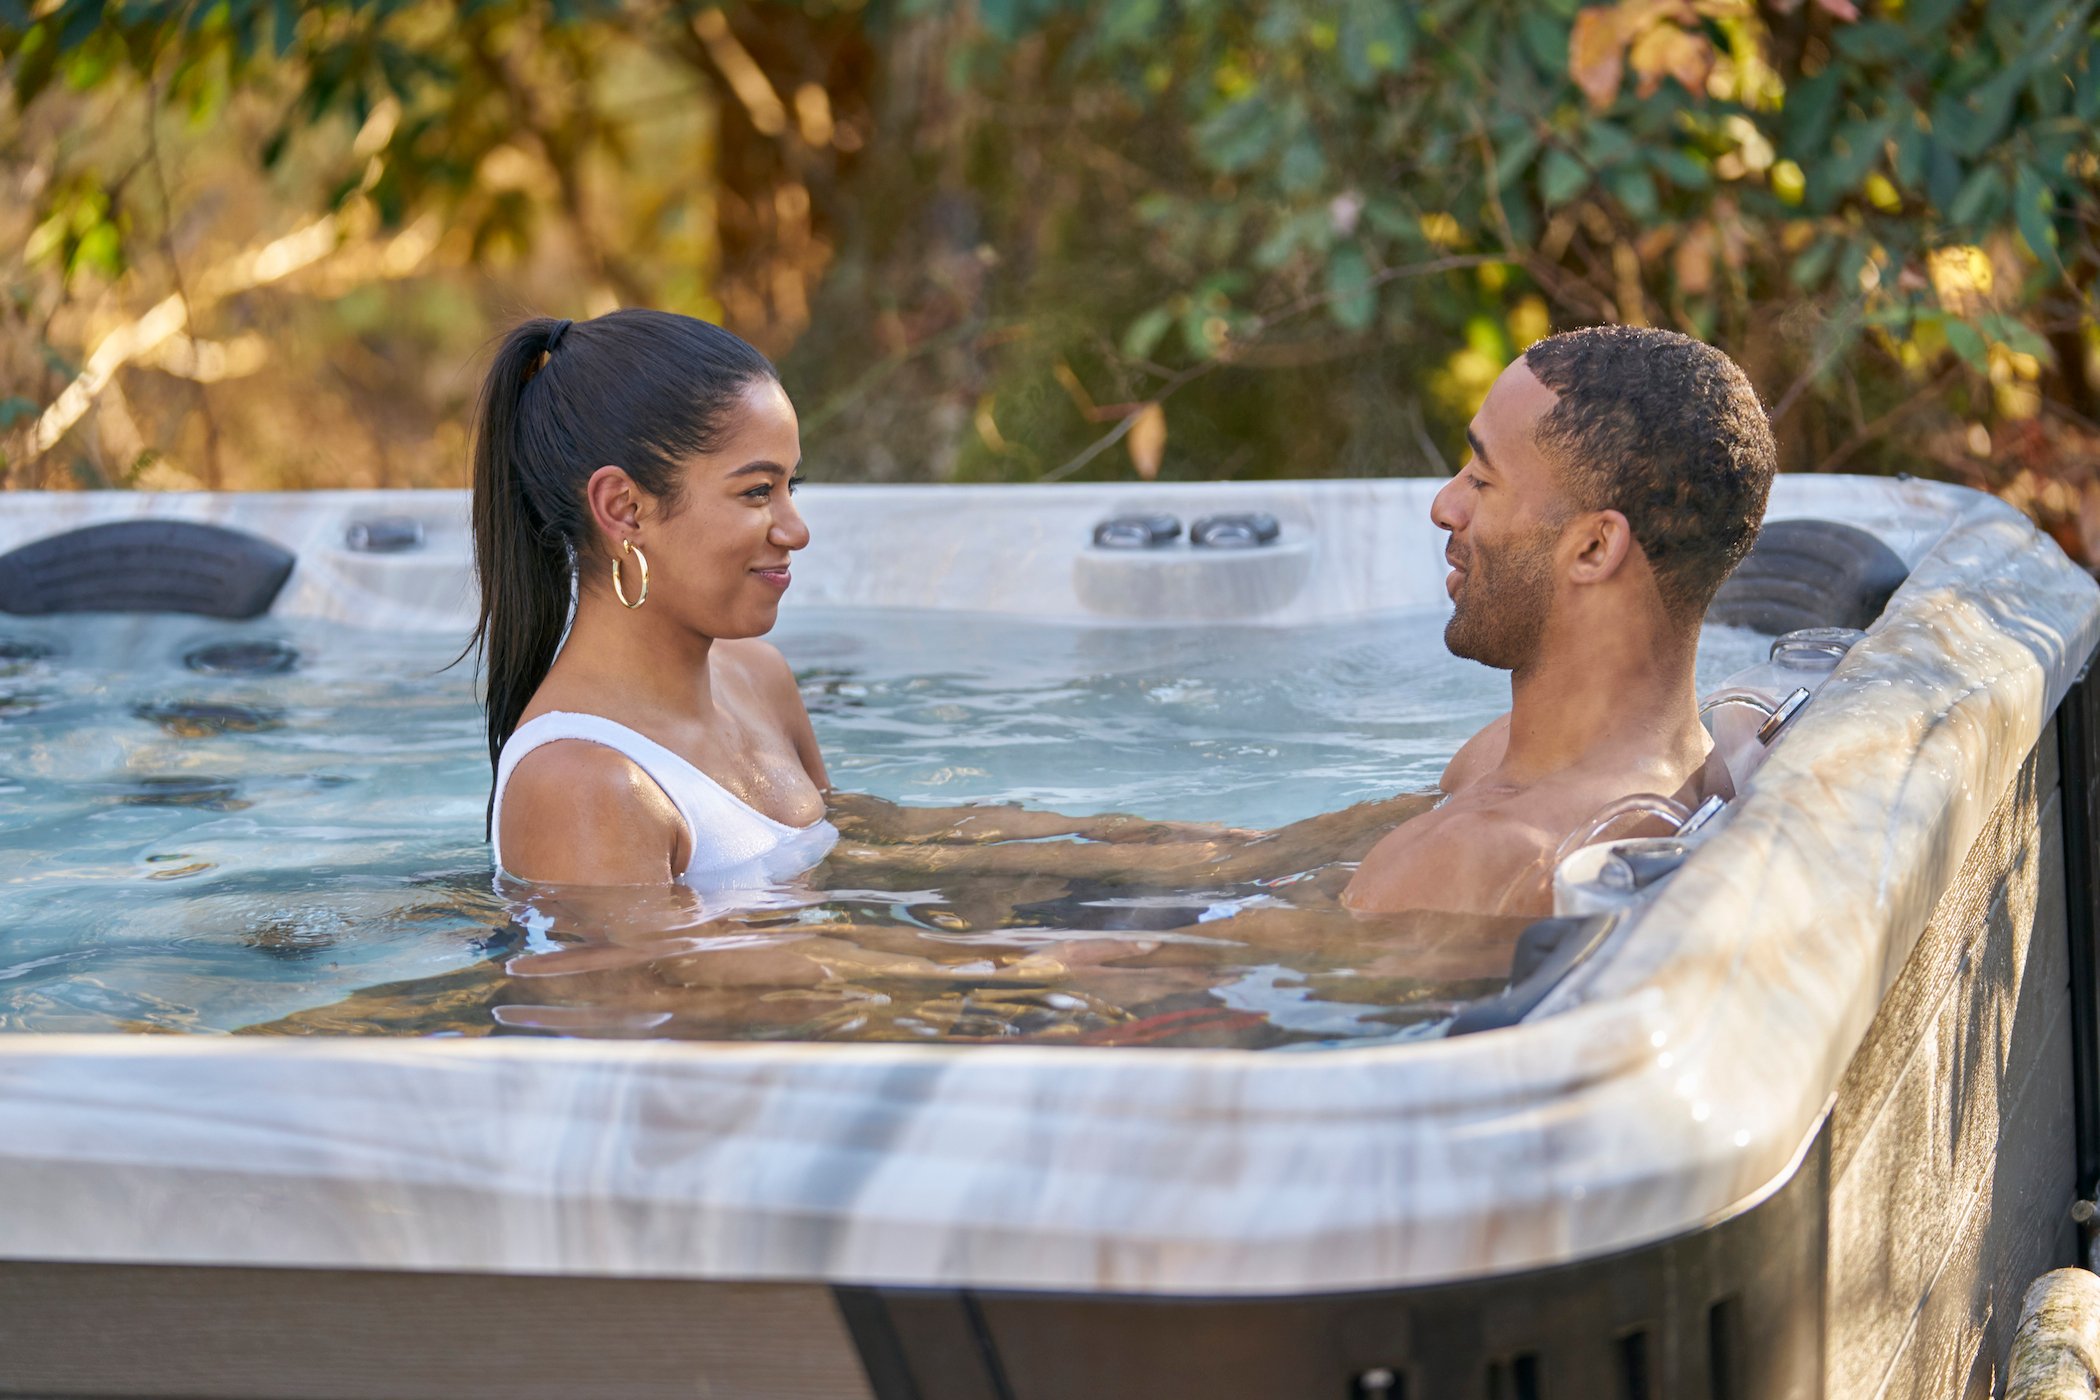 Matt James and Bri Springs in a hot tub together on 'The Bachelor'